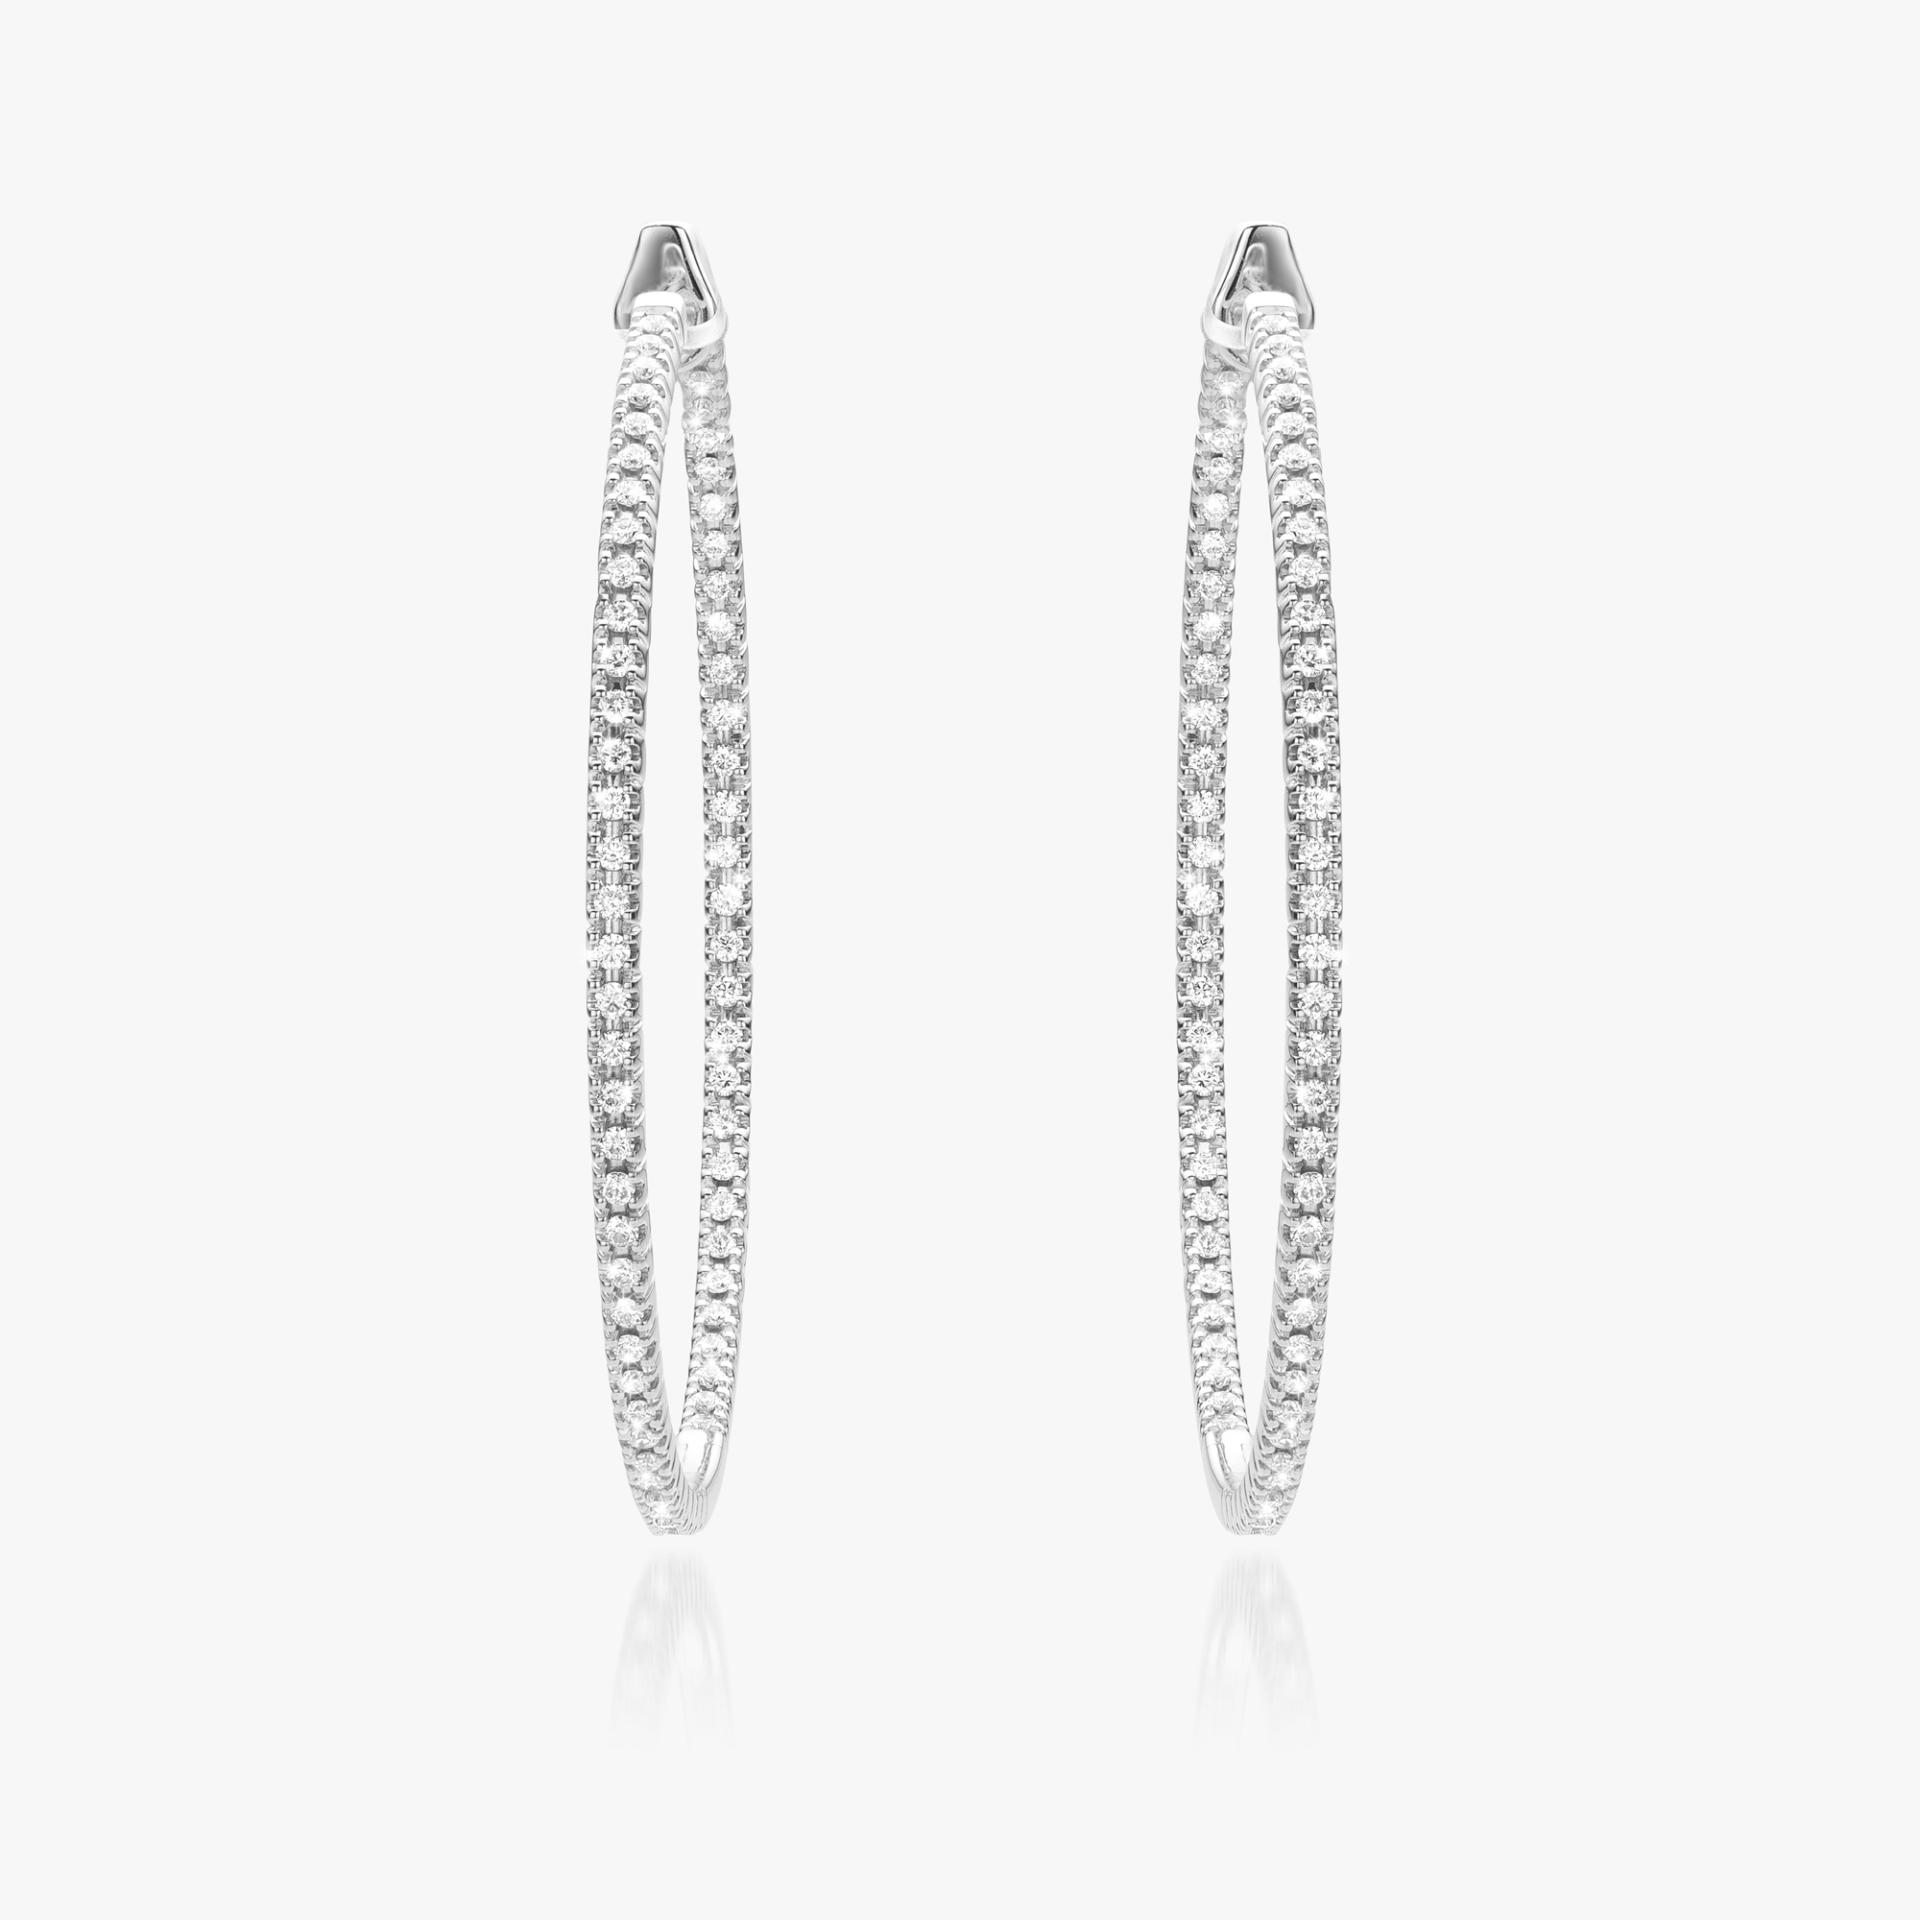 White gold earrings set with brilliants made by Maison De Greef